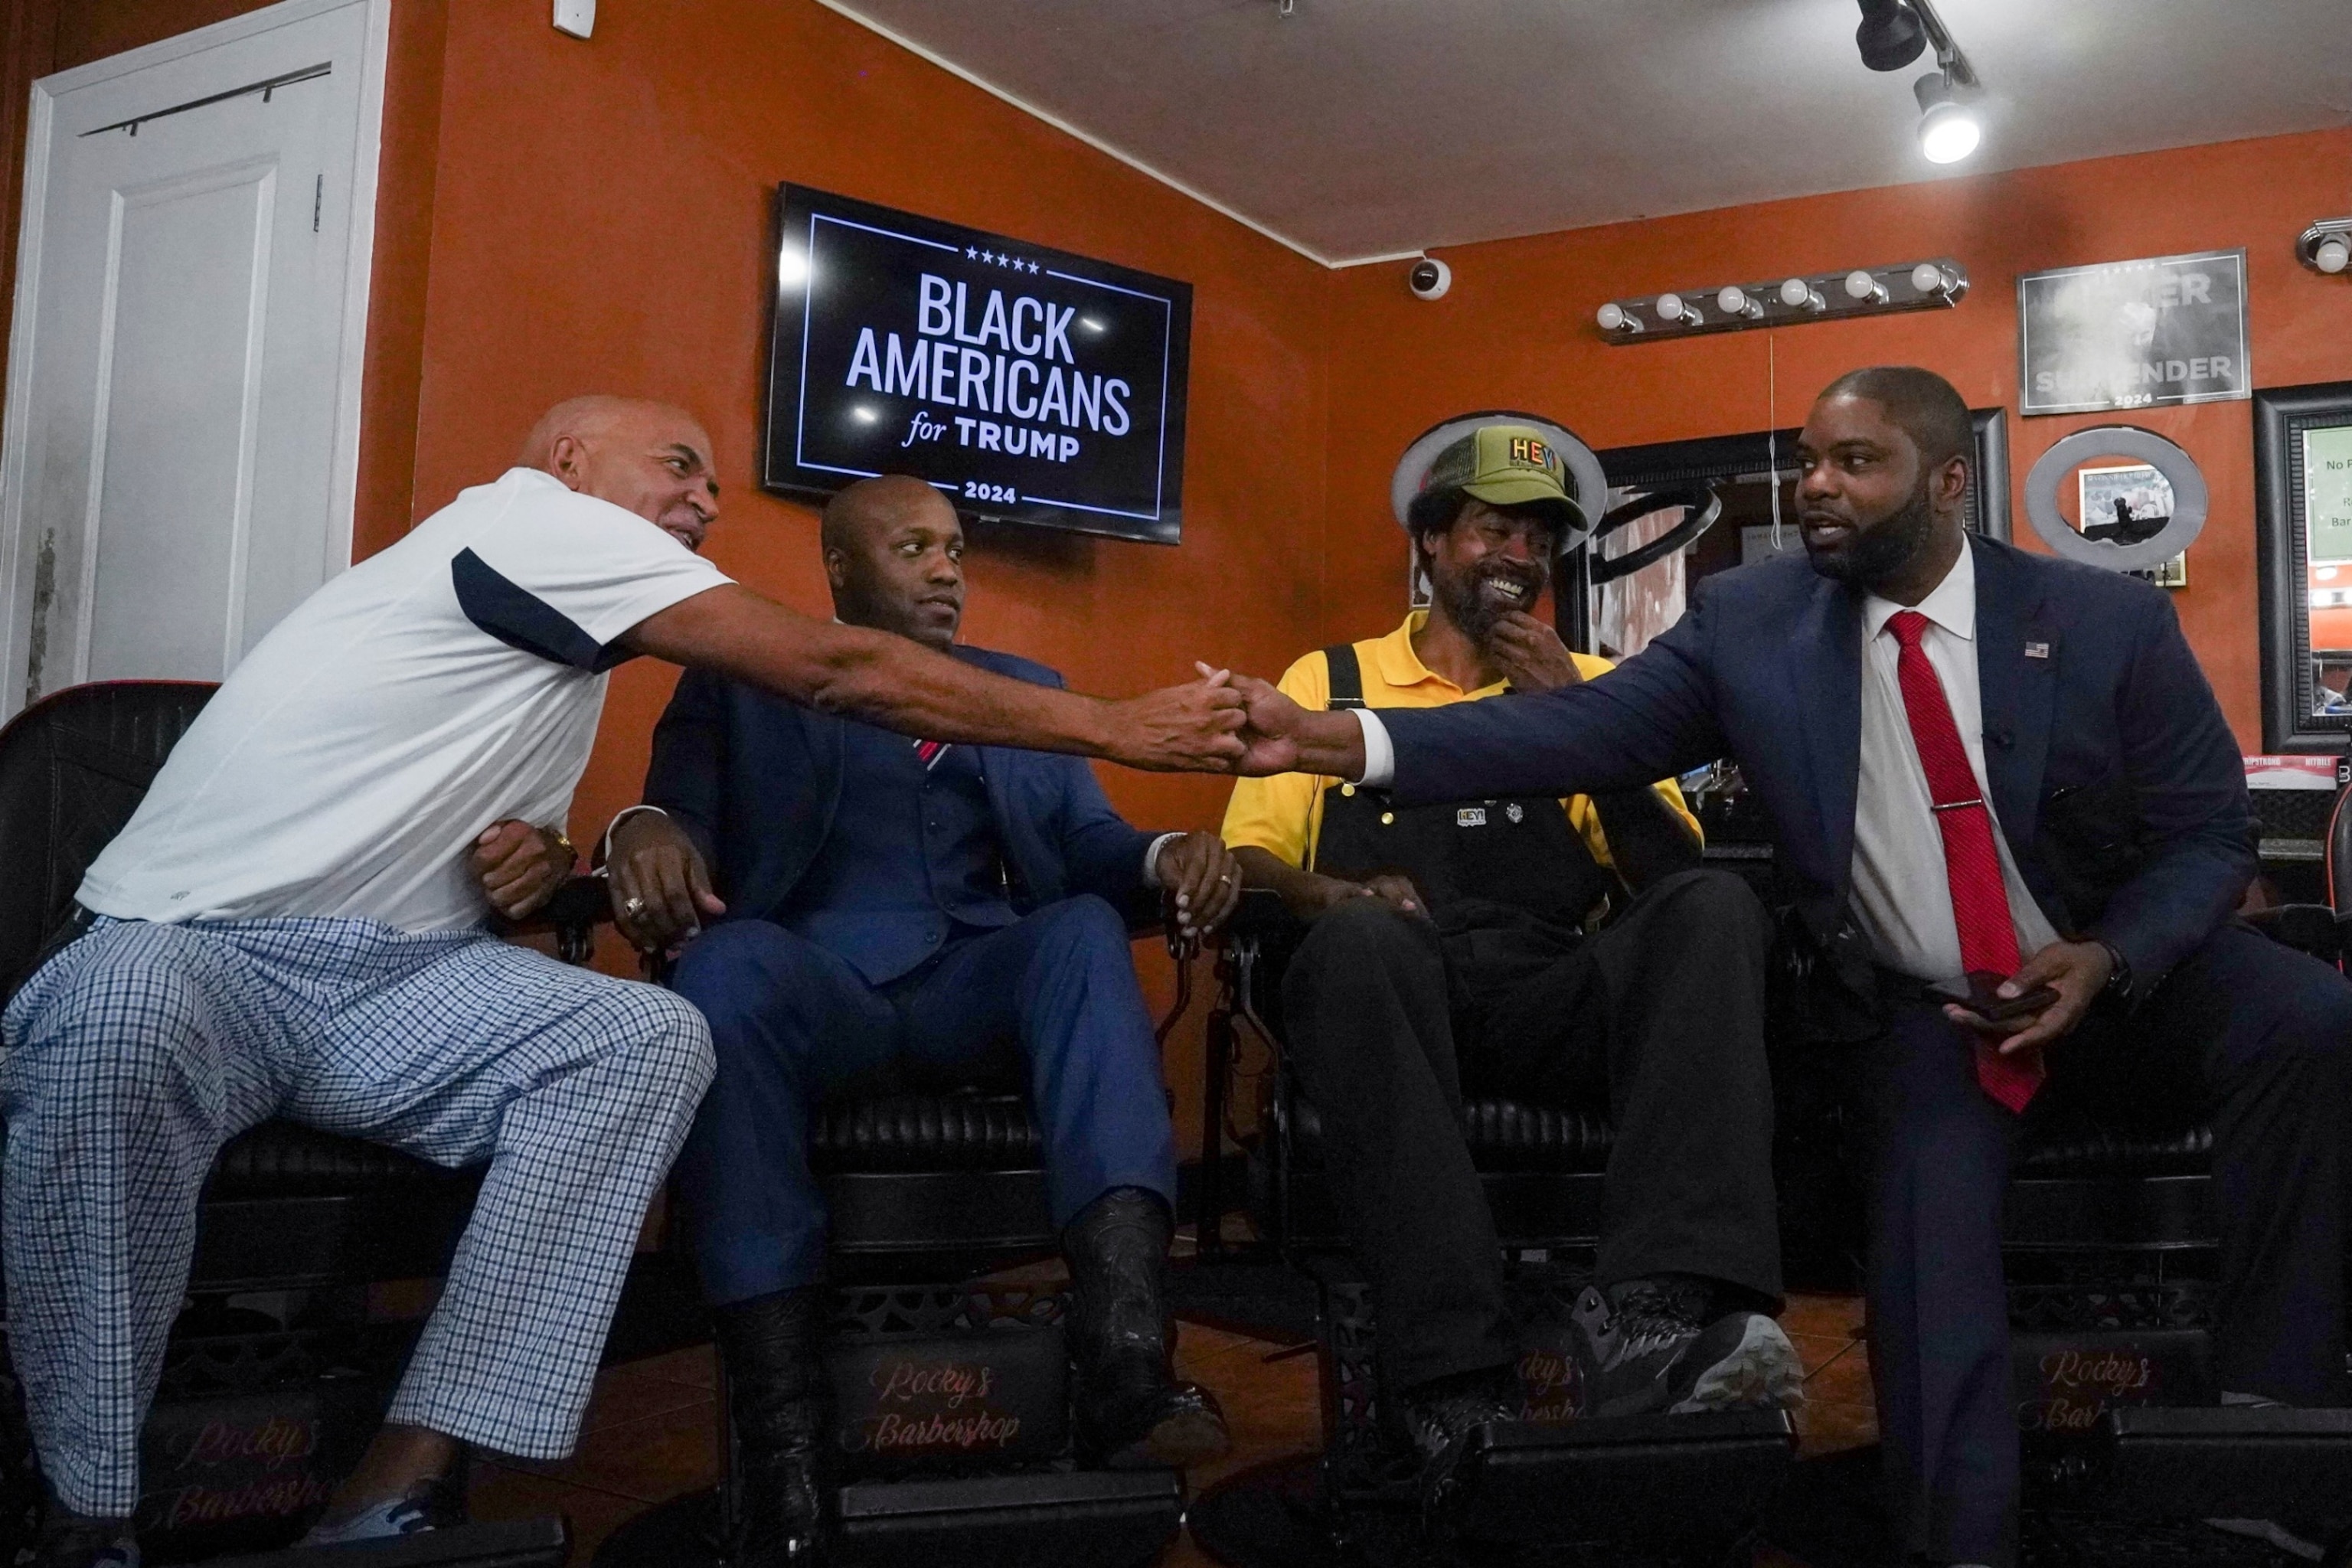 PHOTO: Radio host Wynter and Congressman Donalds shake hands at a round table discussion hosted by former President Trump during a campaign stop for a "Black American Business Leaders Barbershop Roundtable" at Rocky's Barbershop in Atlanta, June 26, 2024.